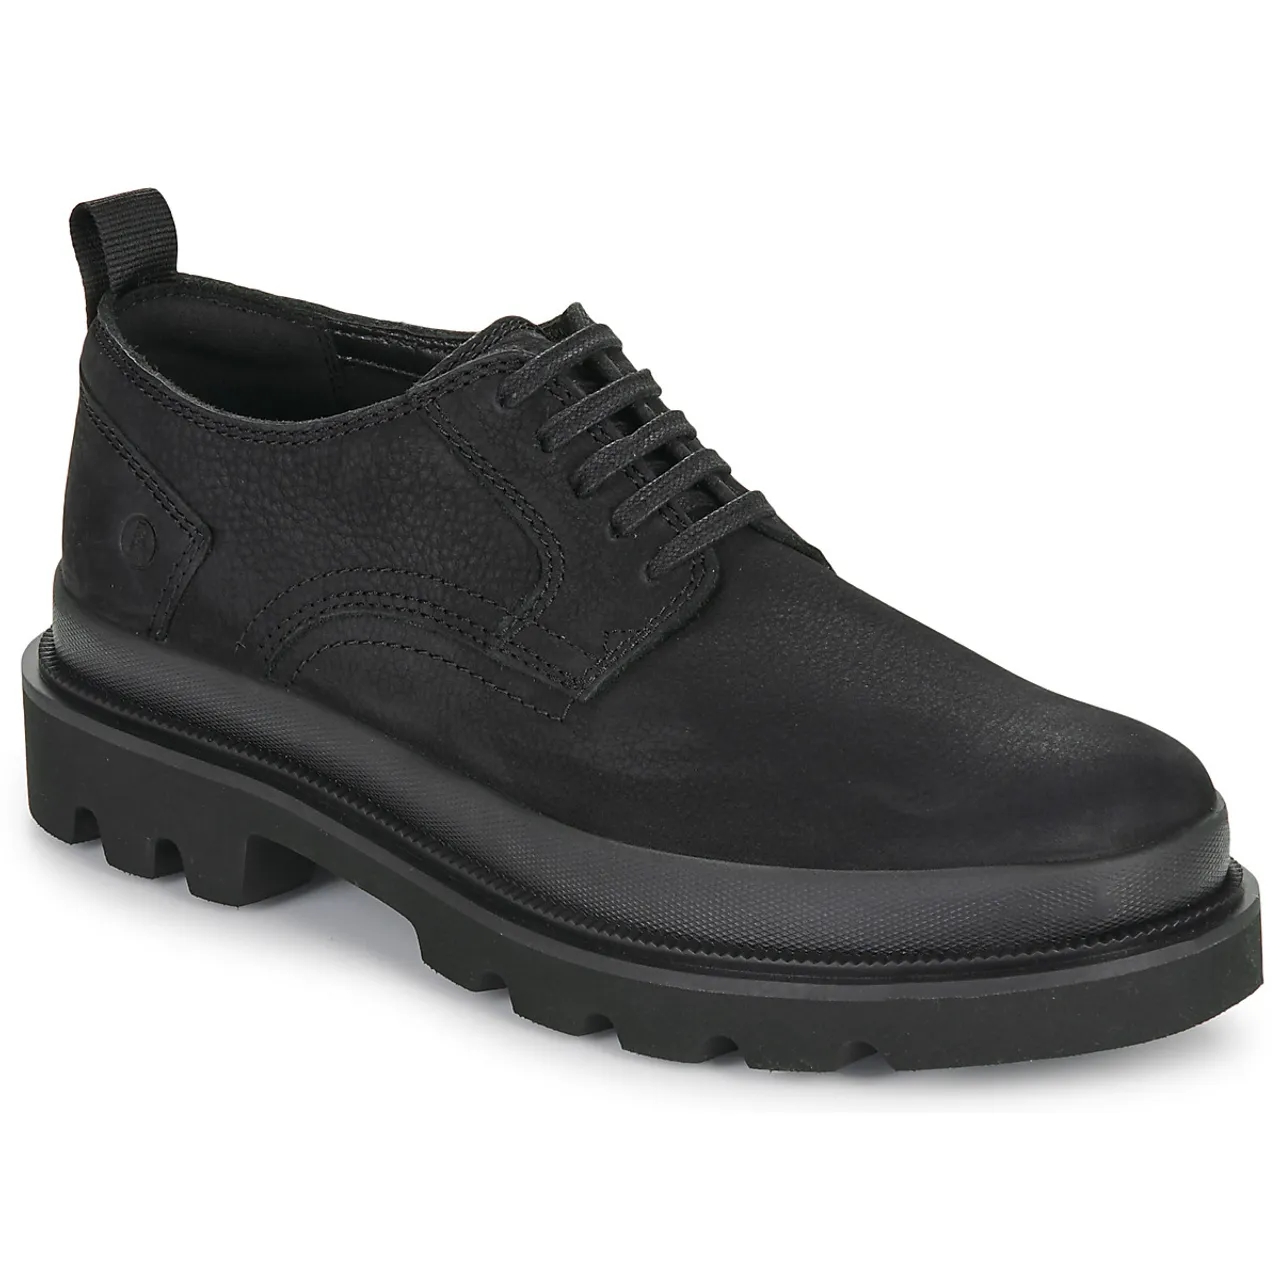 Clarks  BADELL LACE  men's Casual Shoes in Black